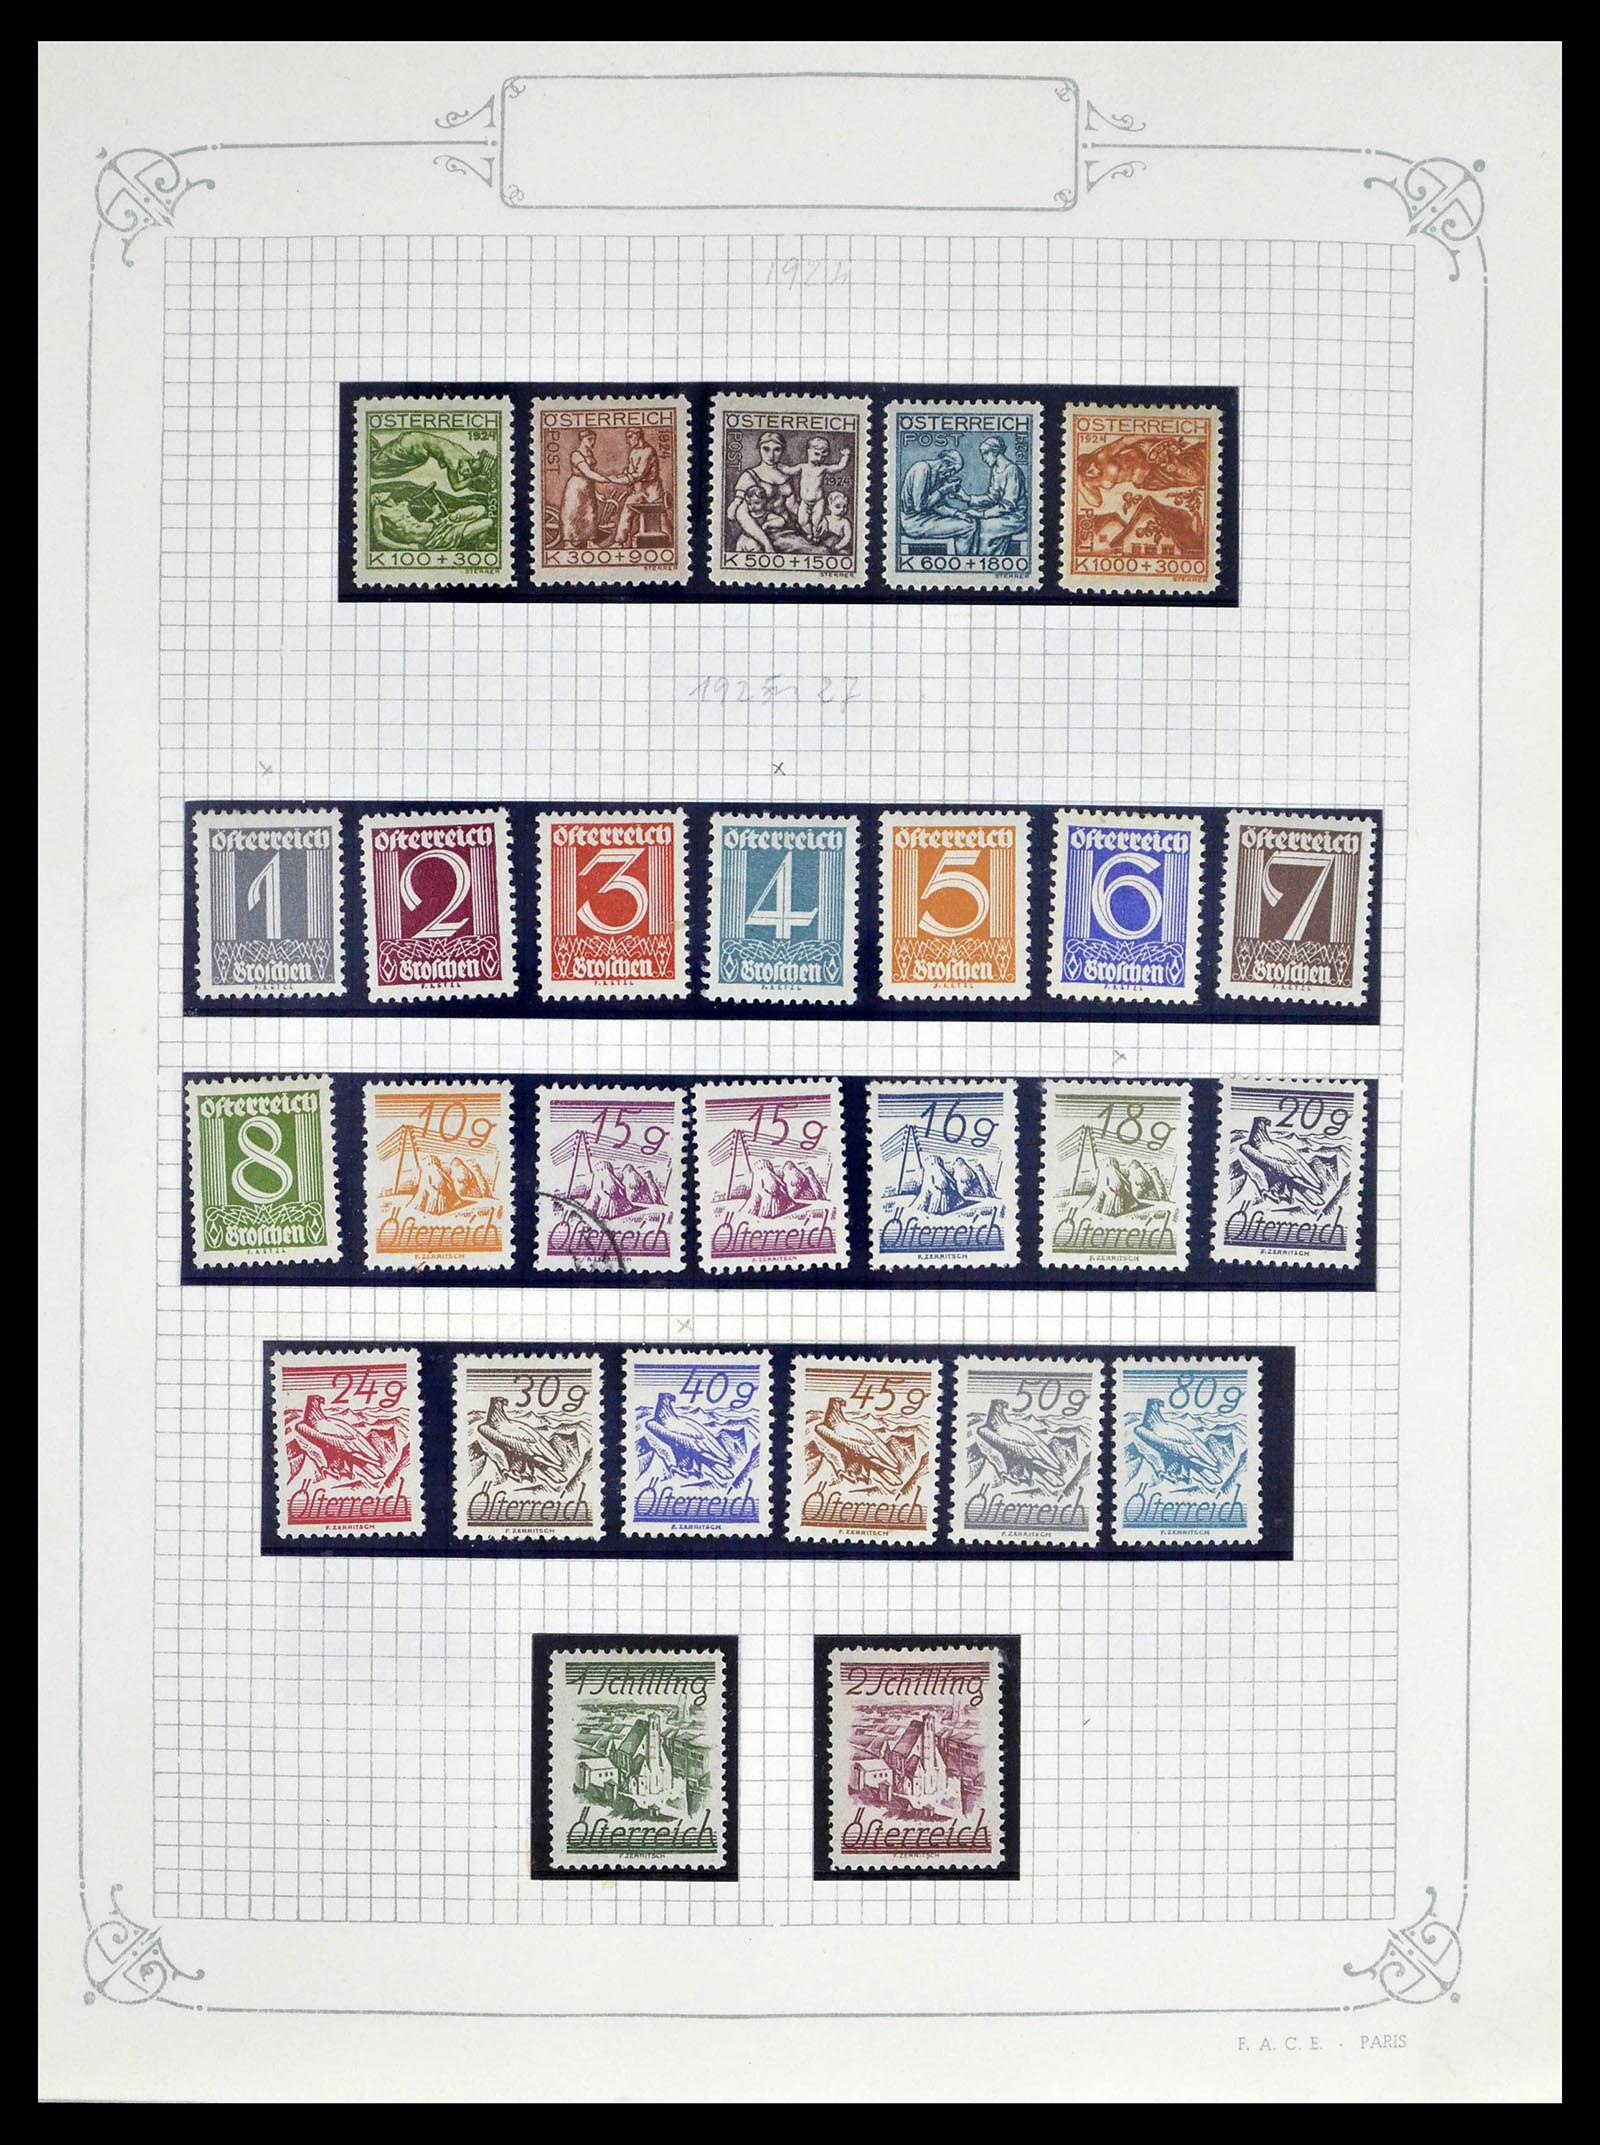 39276 0023 - Stamp collection 39276 Austria and territories 1850-1979.